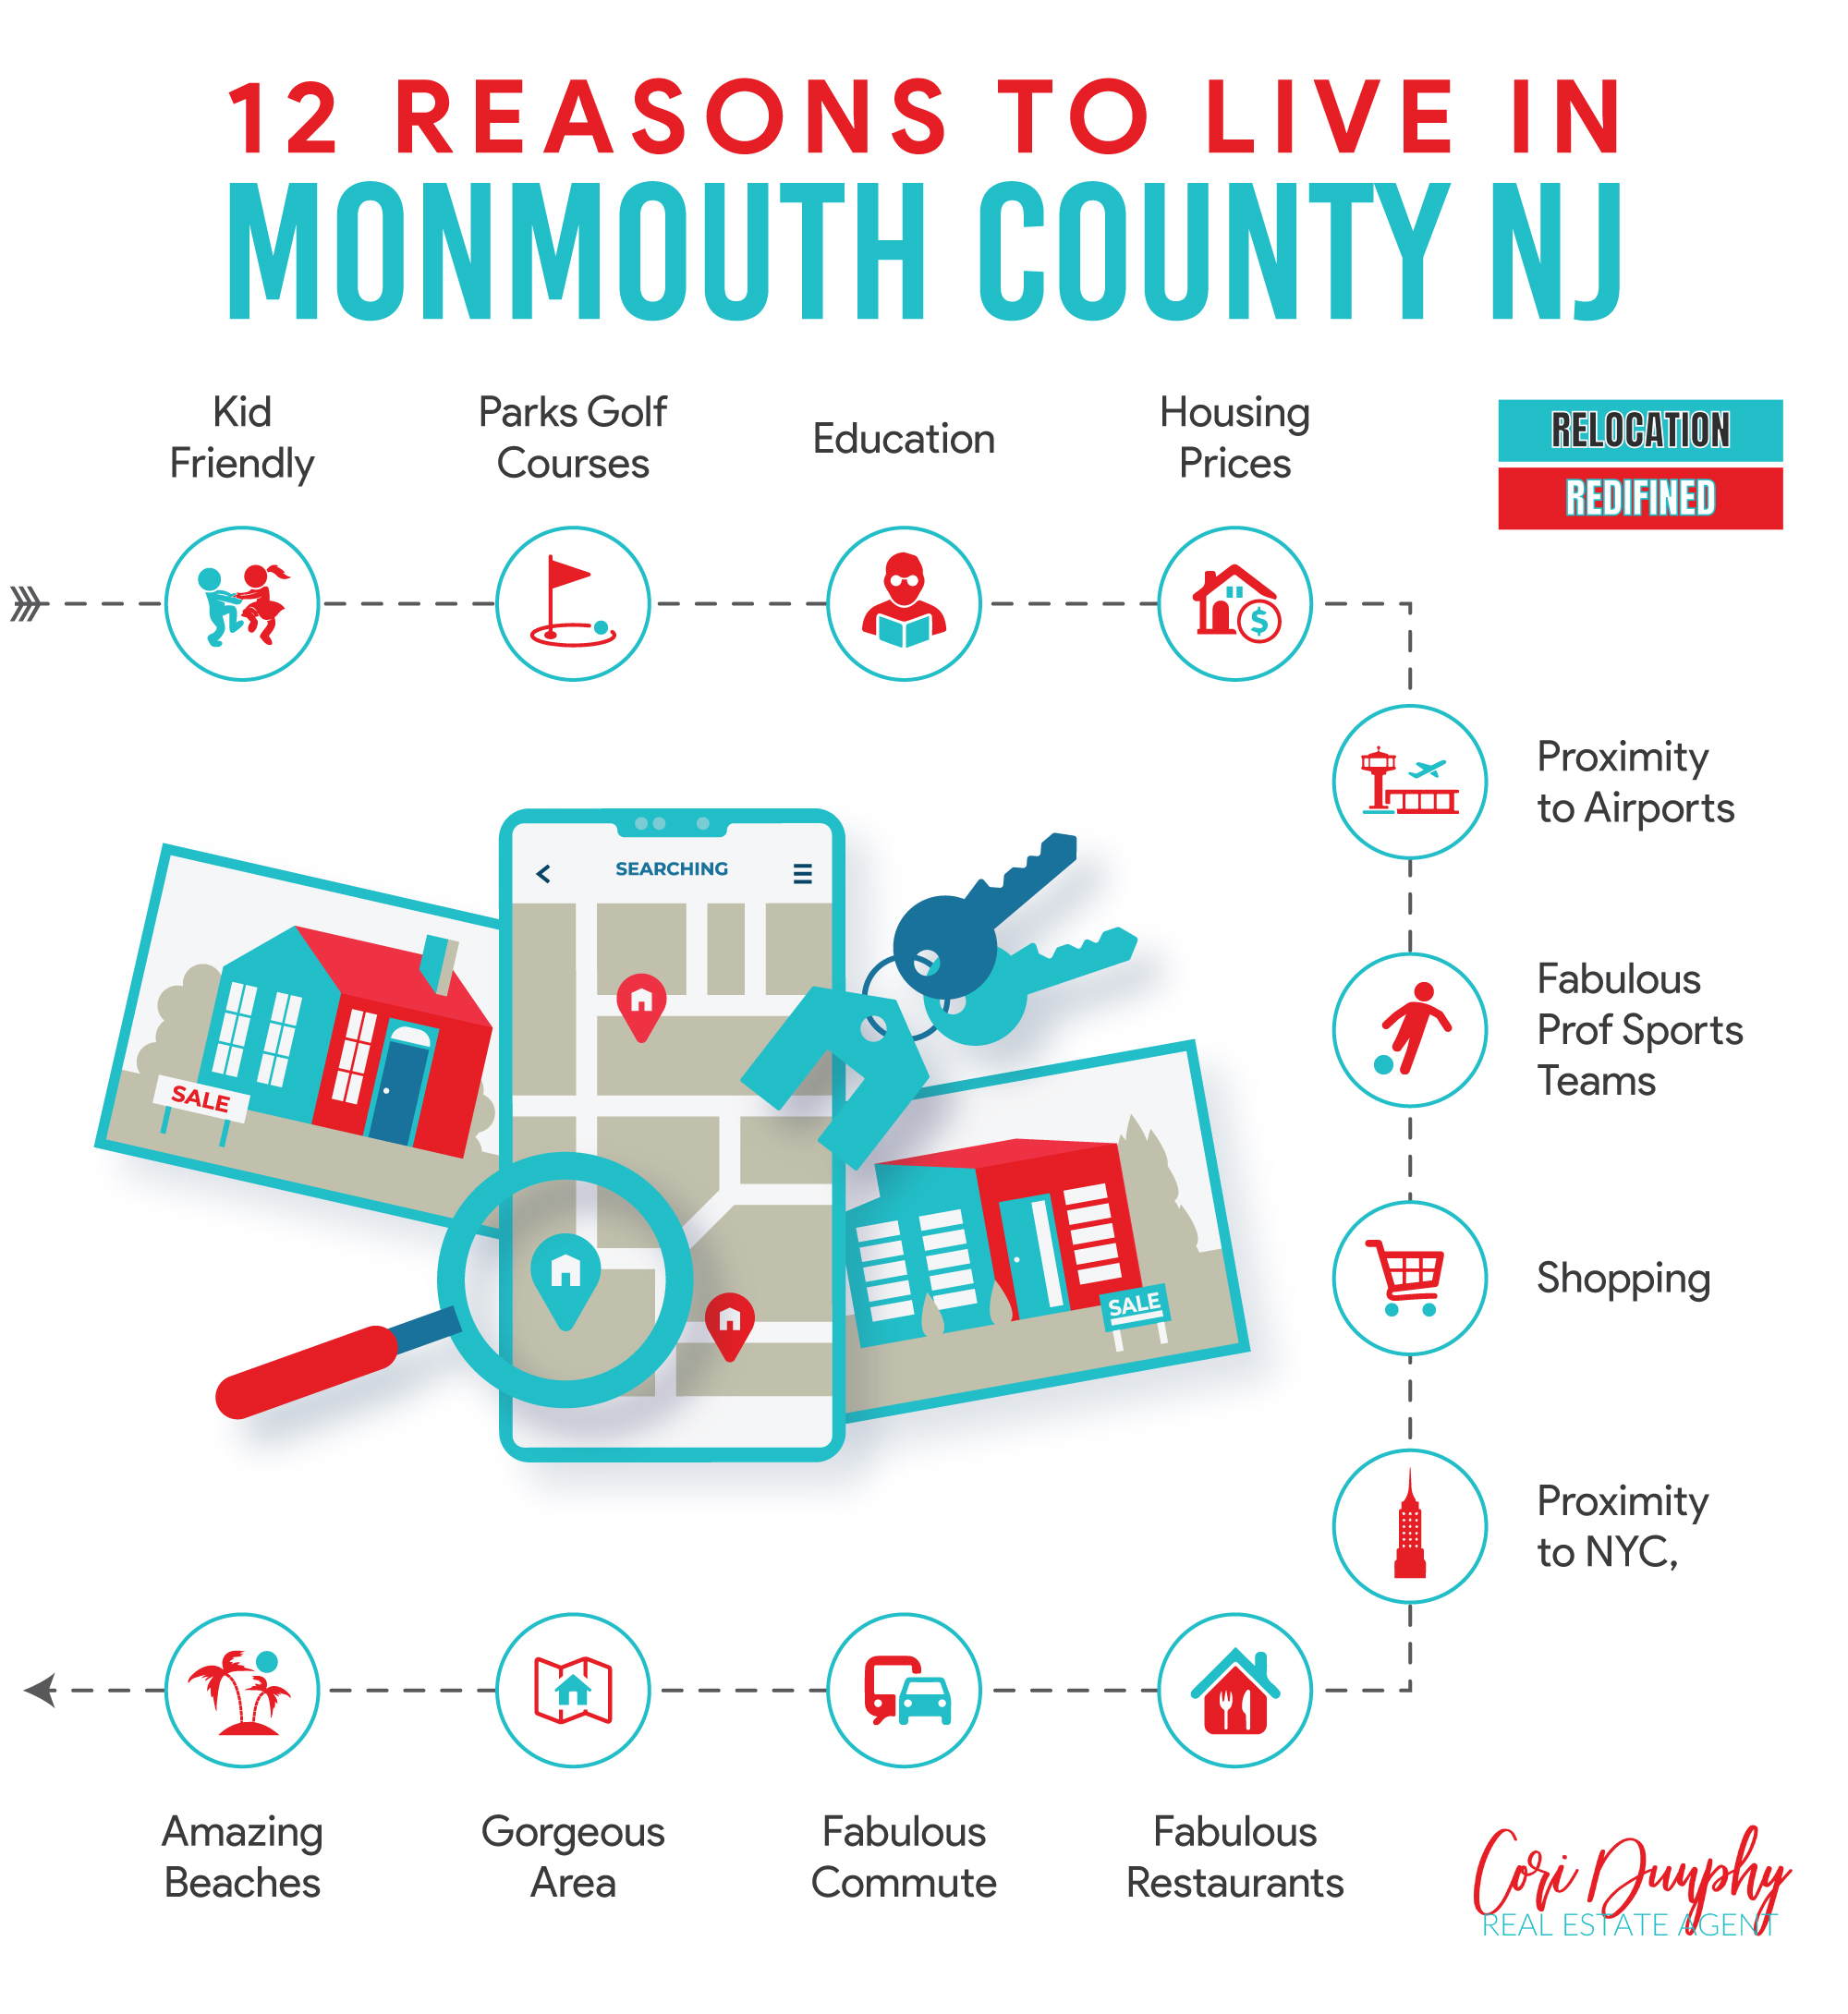 Job listings in monmouth county